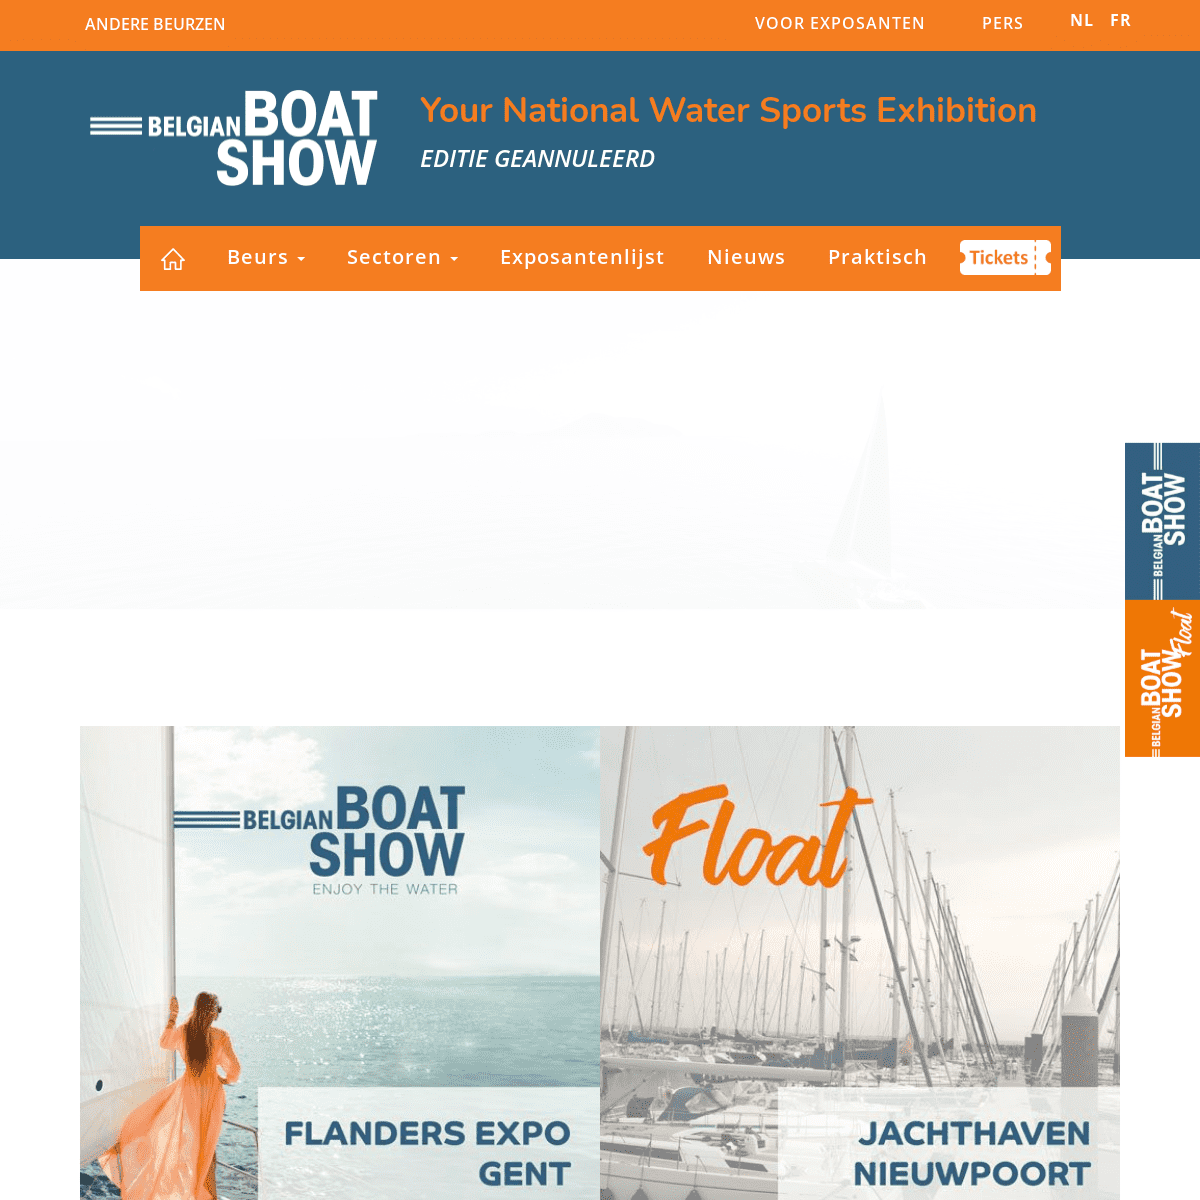 A complete backup of belgianboatshow.be